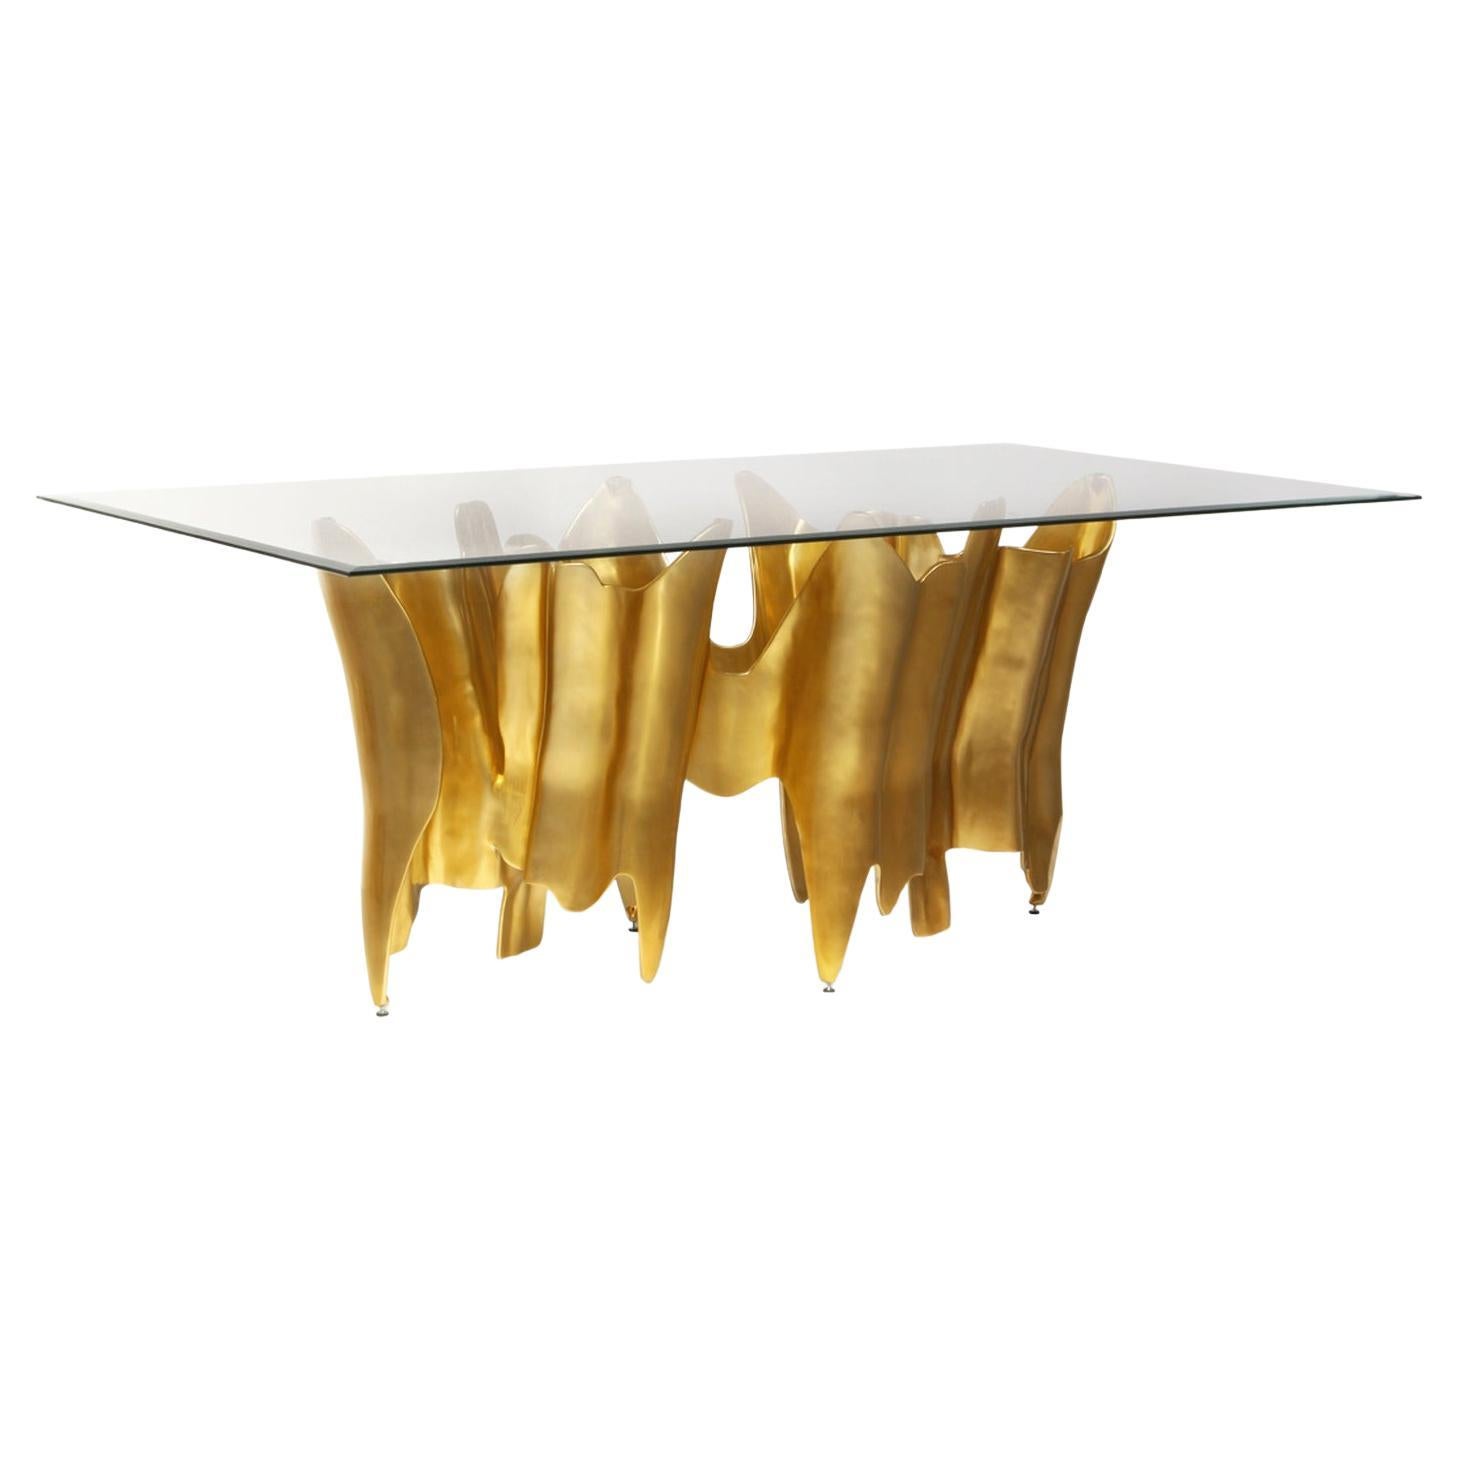 Big Dinning Table Design "Vague" in Metal and Glass